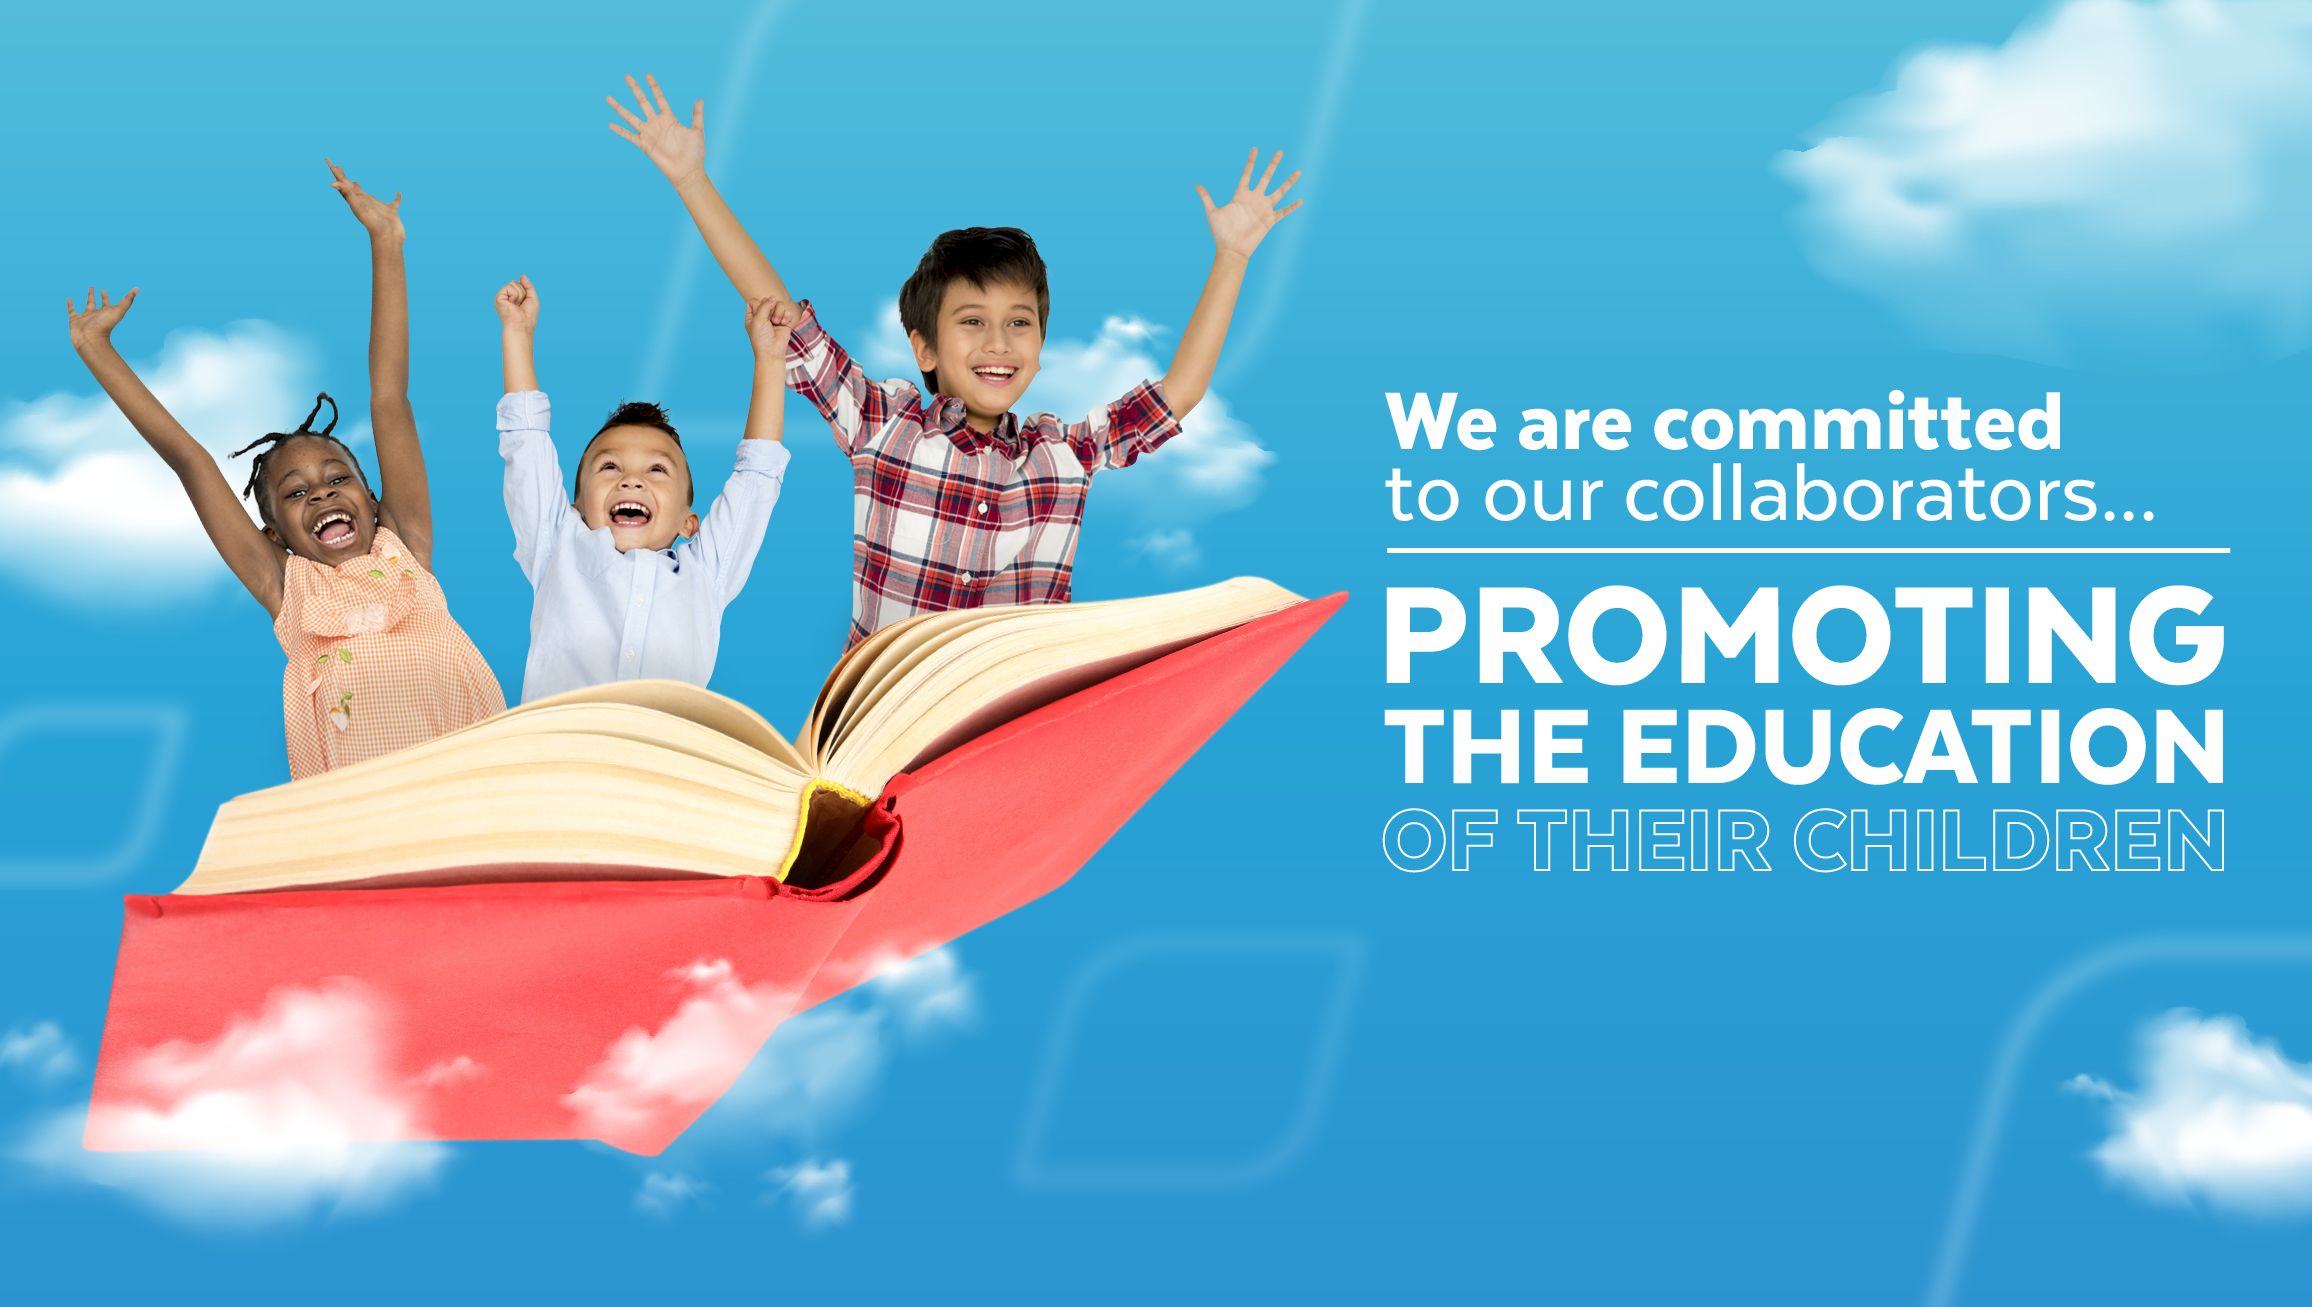 We are committed to our collaborators, promoting the education of their children